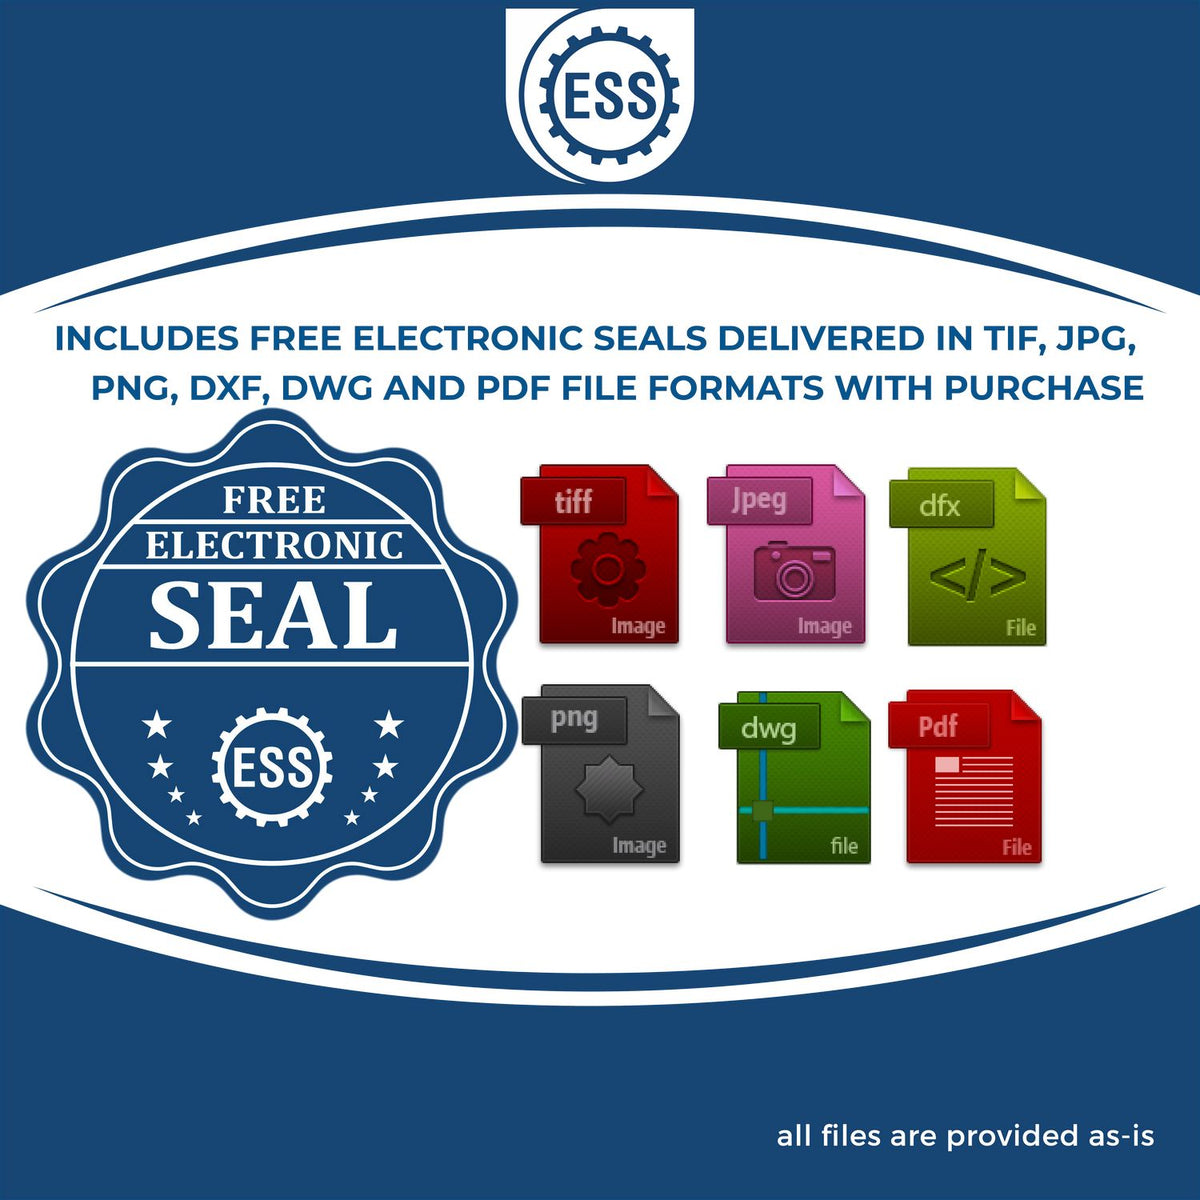 An infographic for the free electronic seal for the PSI Minnesota Notary Stamp illustrating the different file type icons such as DXF, DWG, TIF, JPG and PNG.